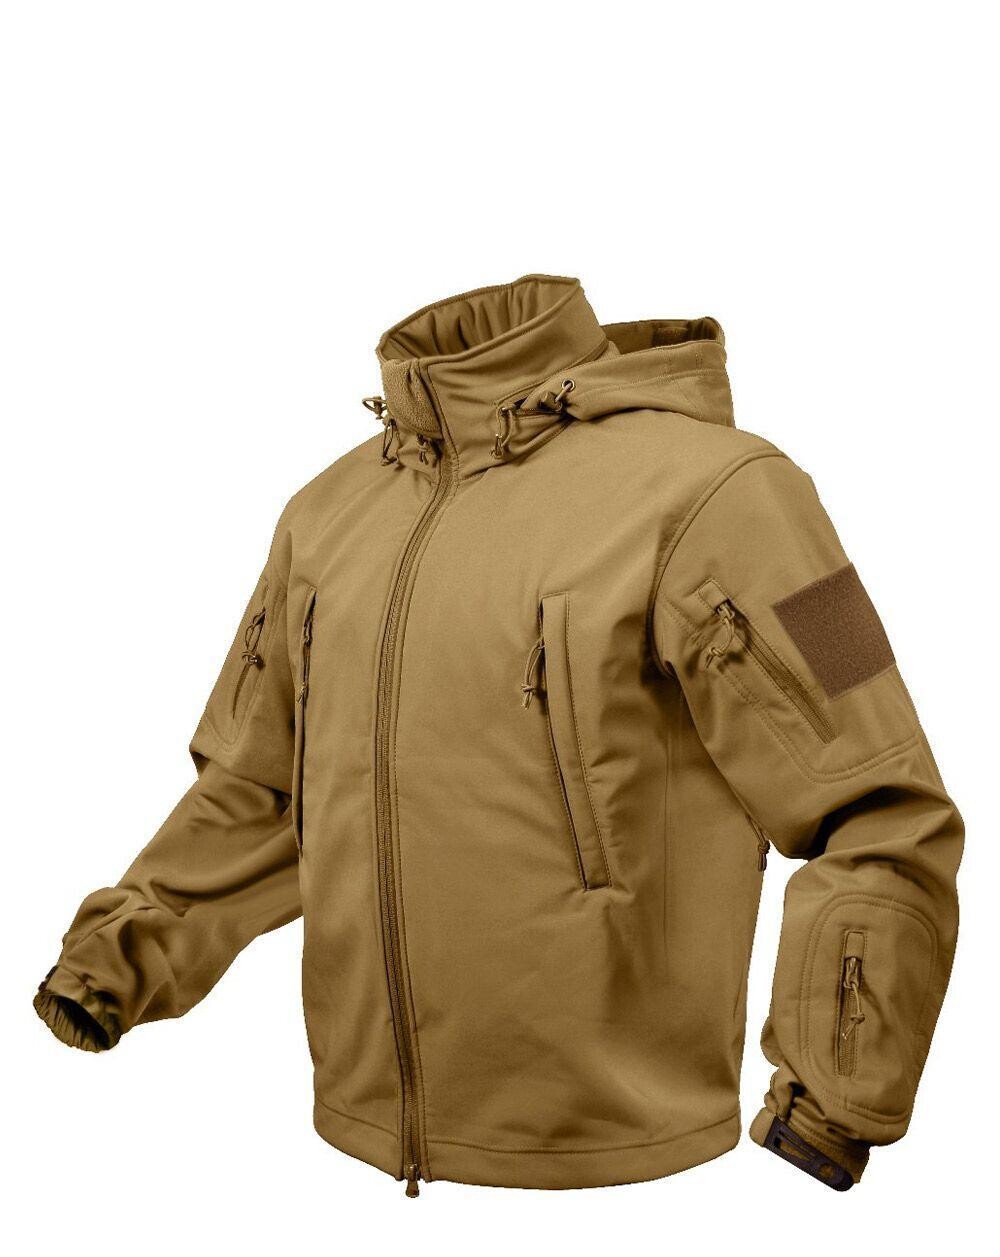 Rothco Special Ops Softshell Jakke (Coyote Brun, 4XL)